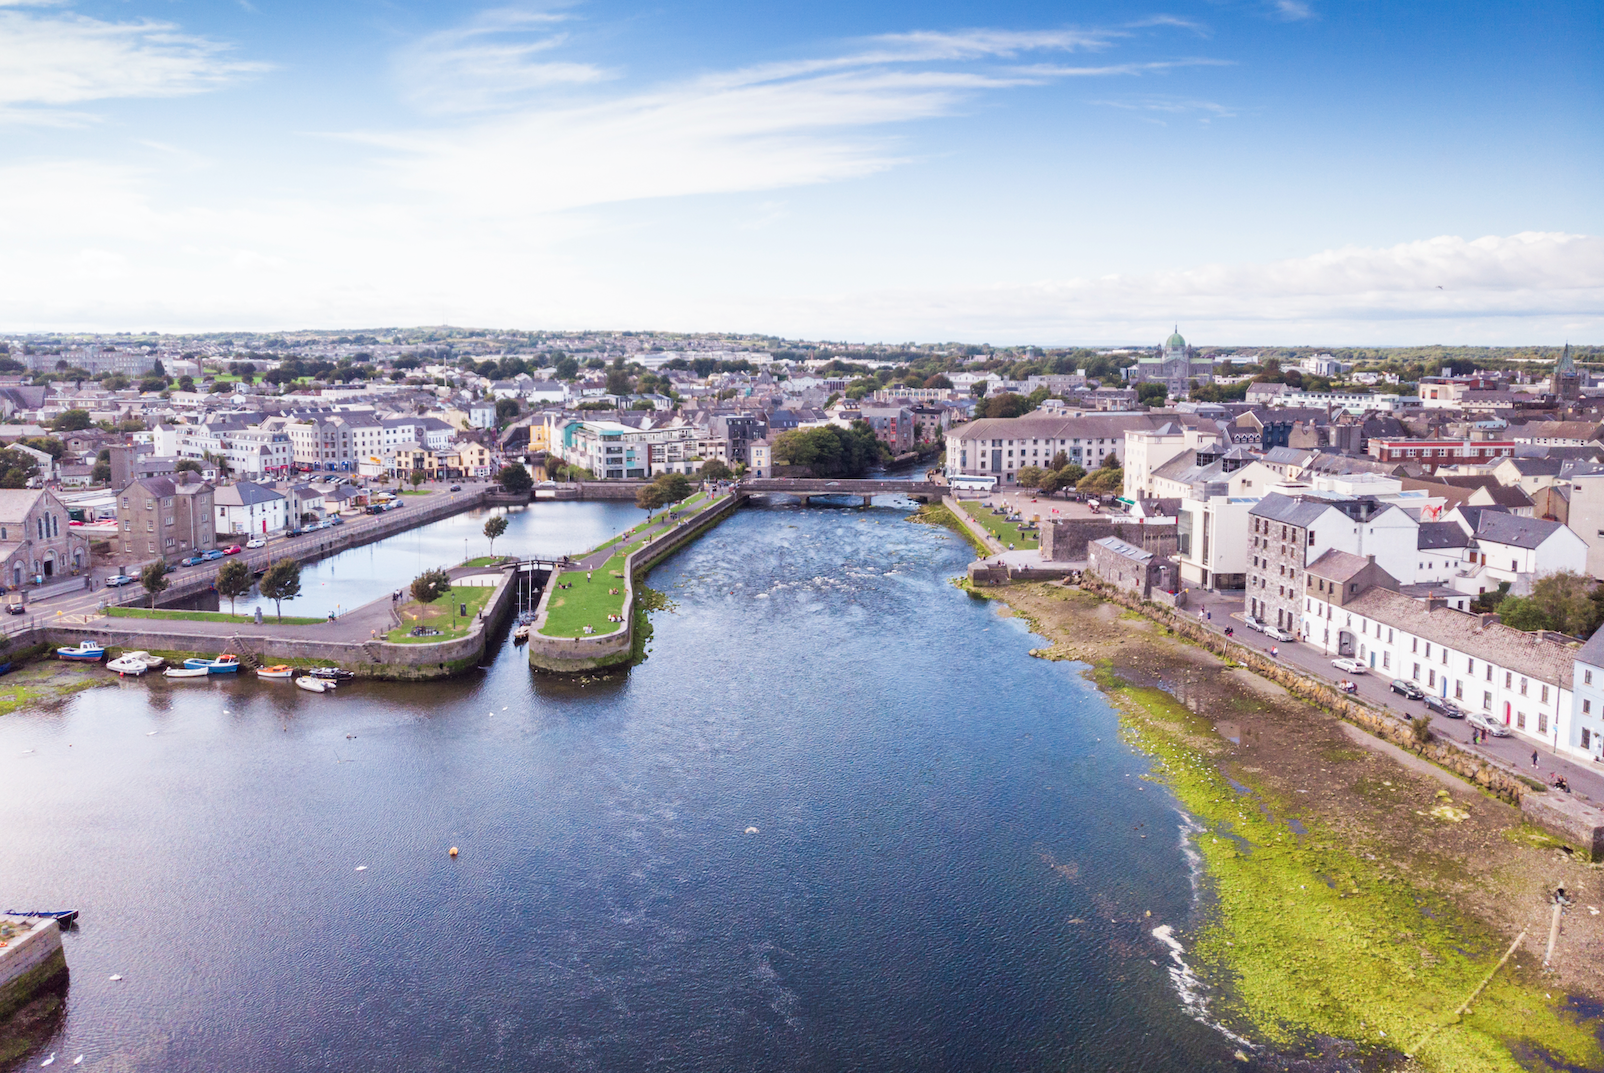 An aerial view of the River Corrib, the Claddagh Basin and the street known as The Long Walk in Galway, Ireland, a European Capital of Culture 2020.